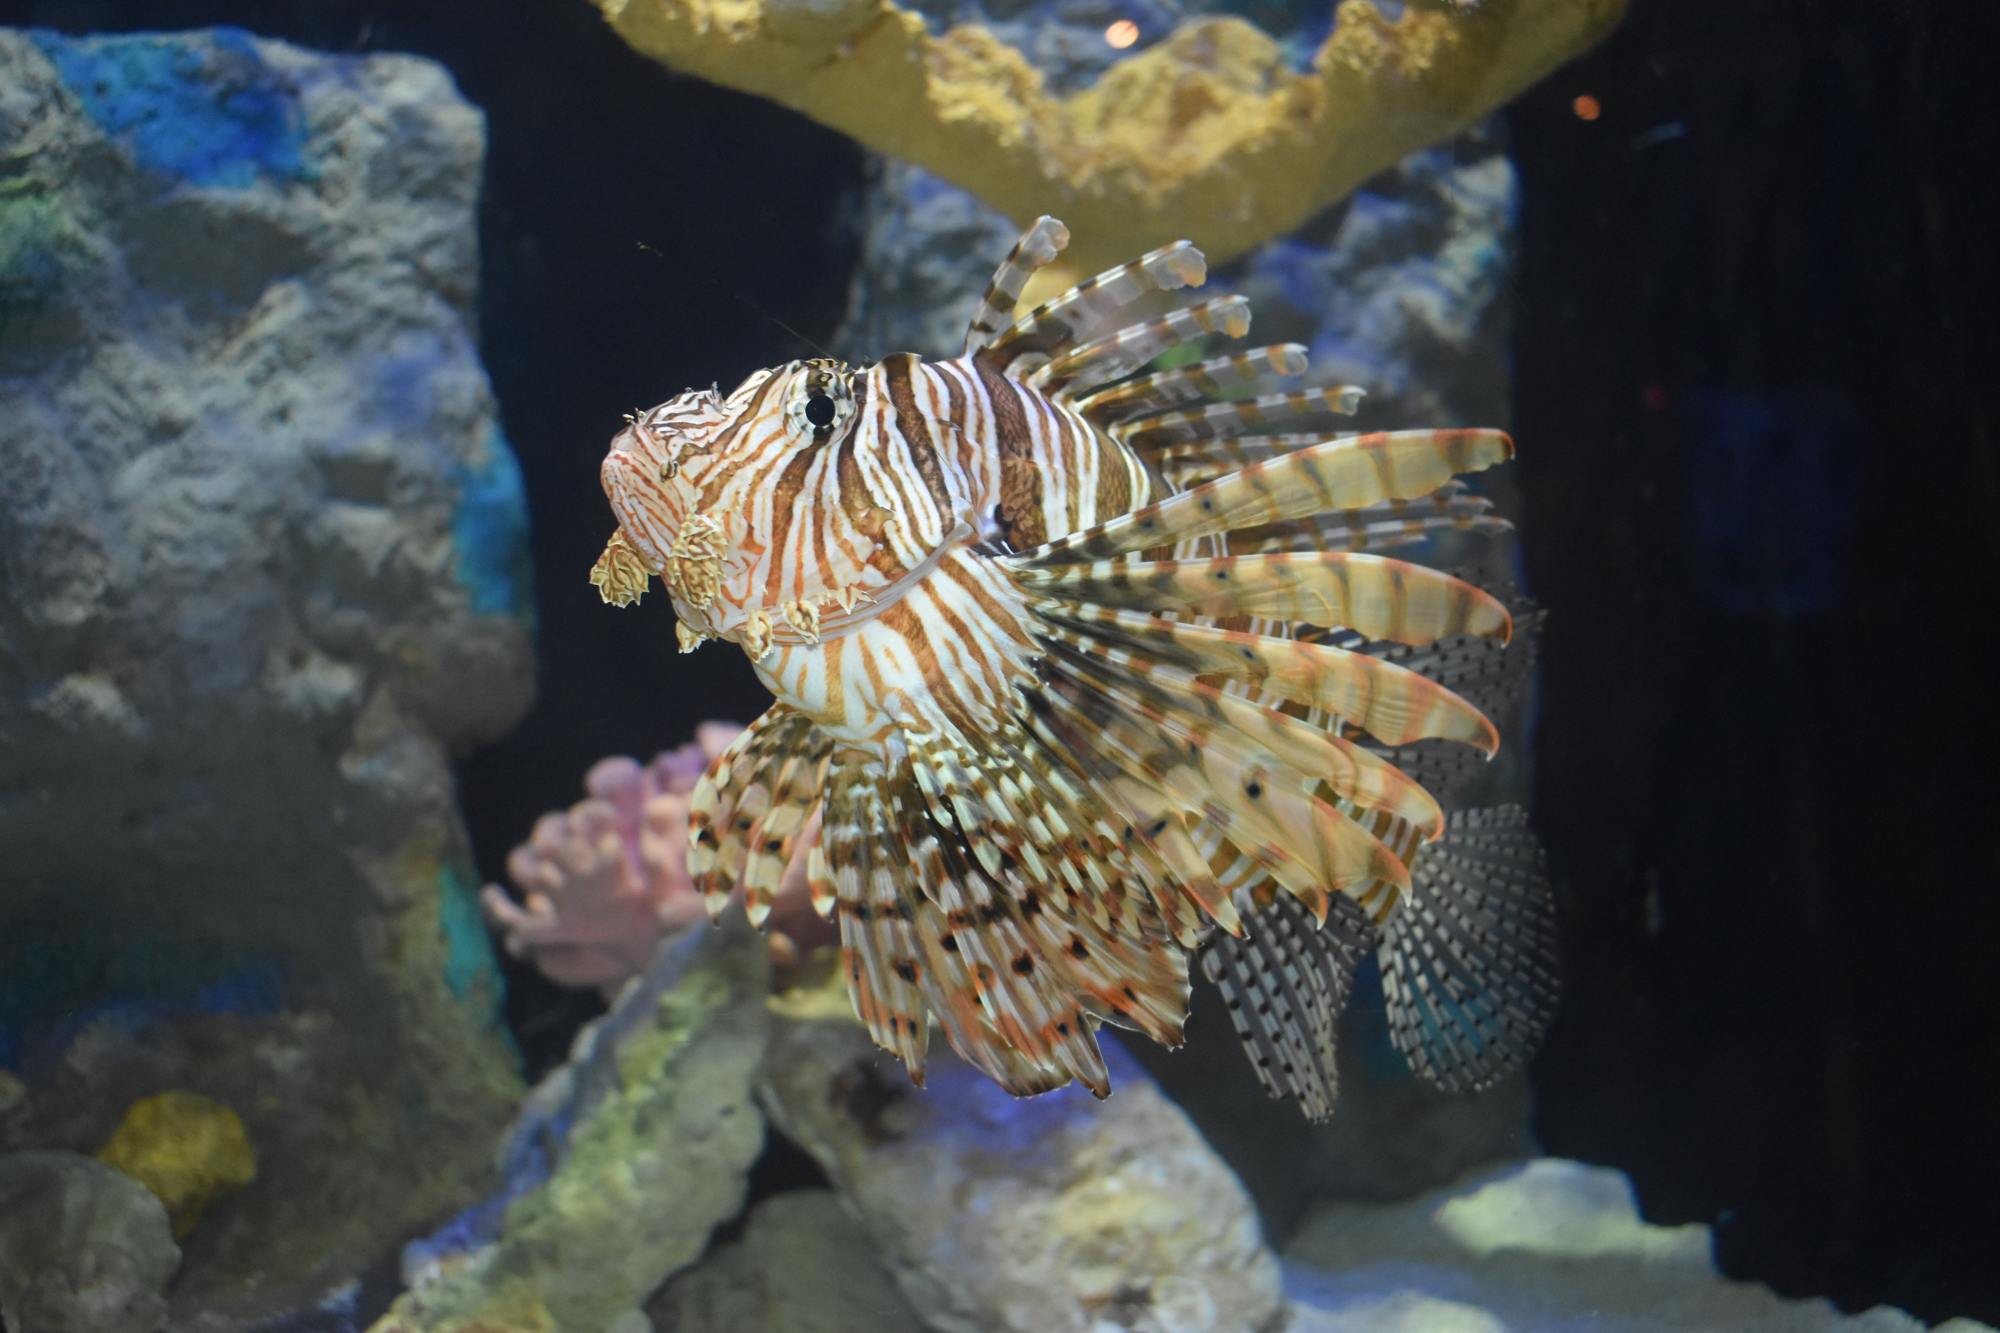 Lionfish derbies like the one July 12–14 in Sarasota aim to cut back on the invasive species' presence in these waters.